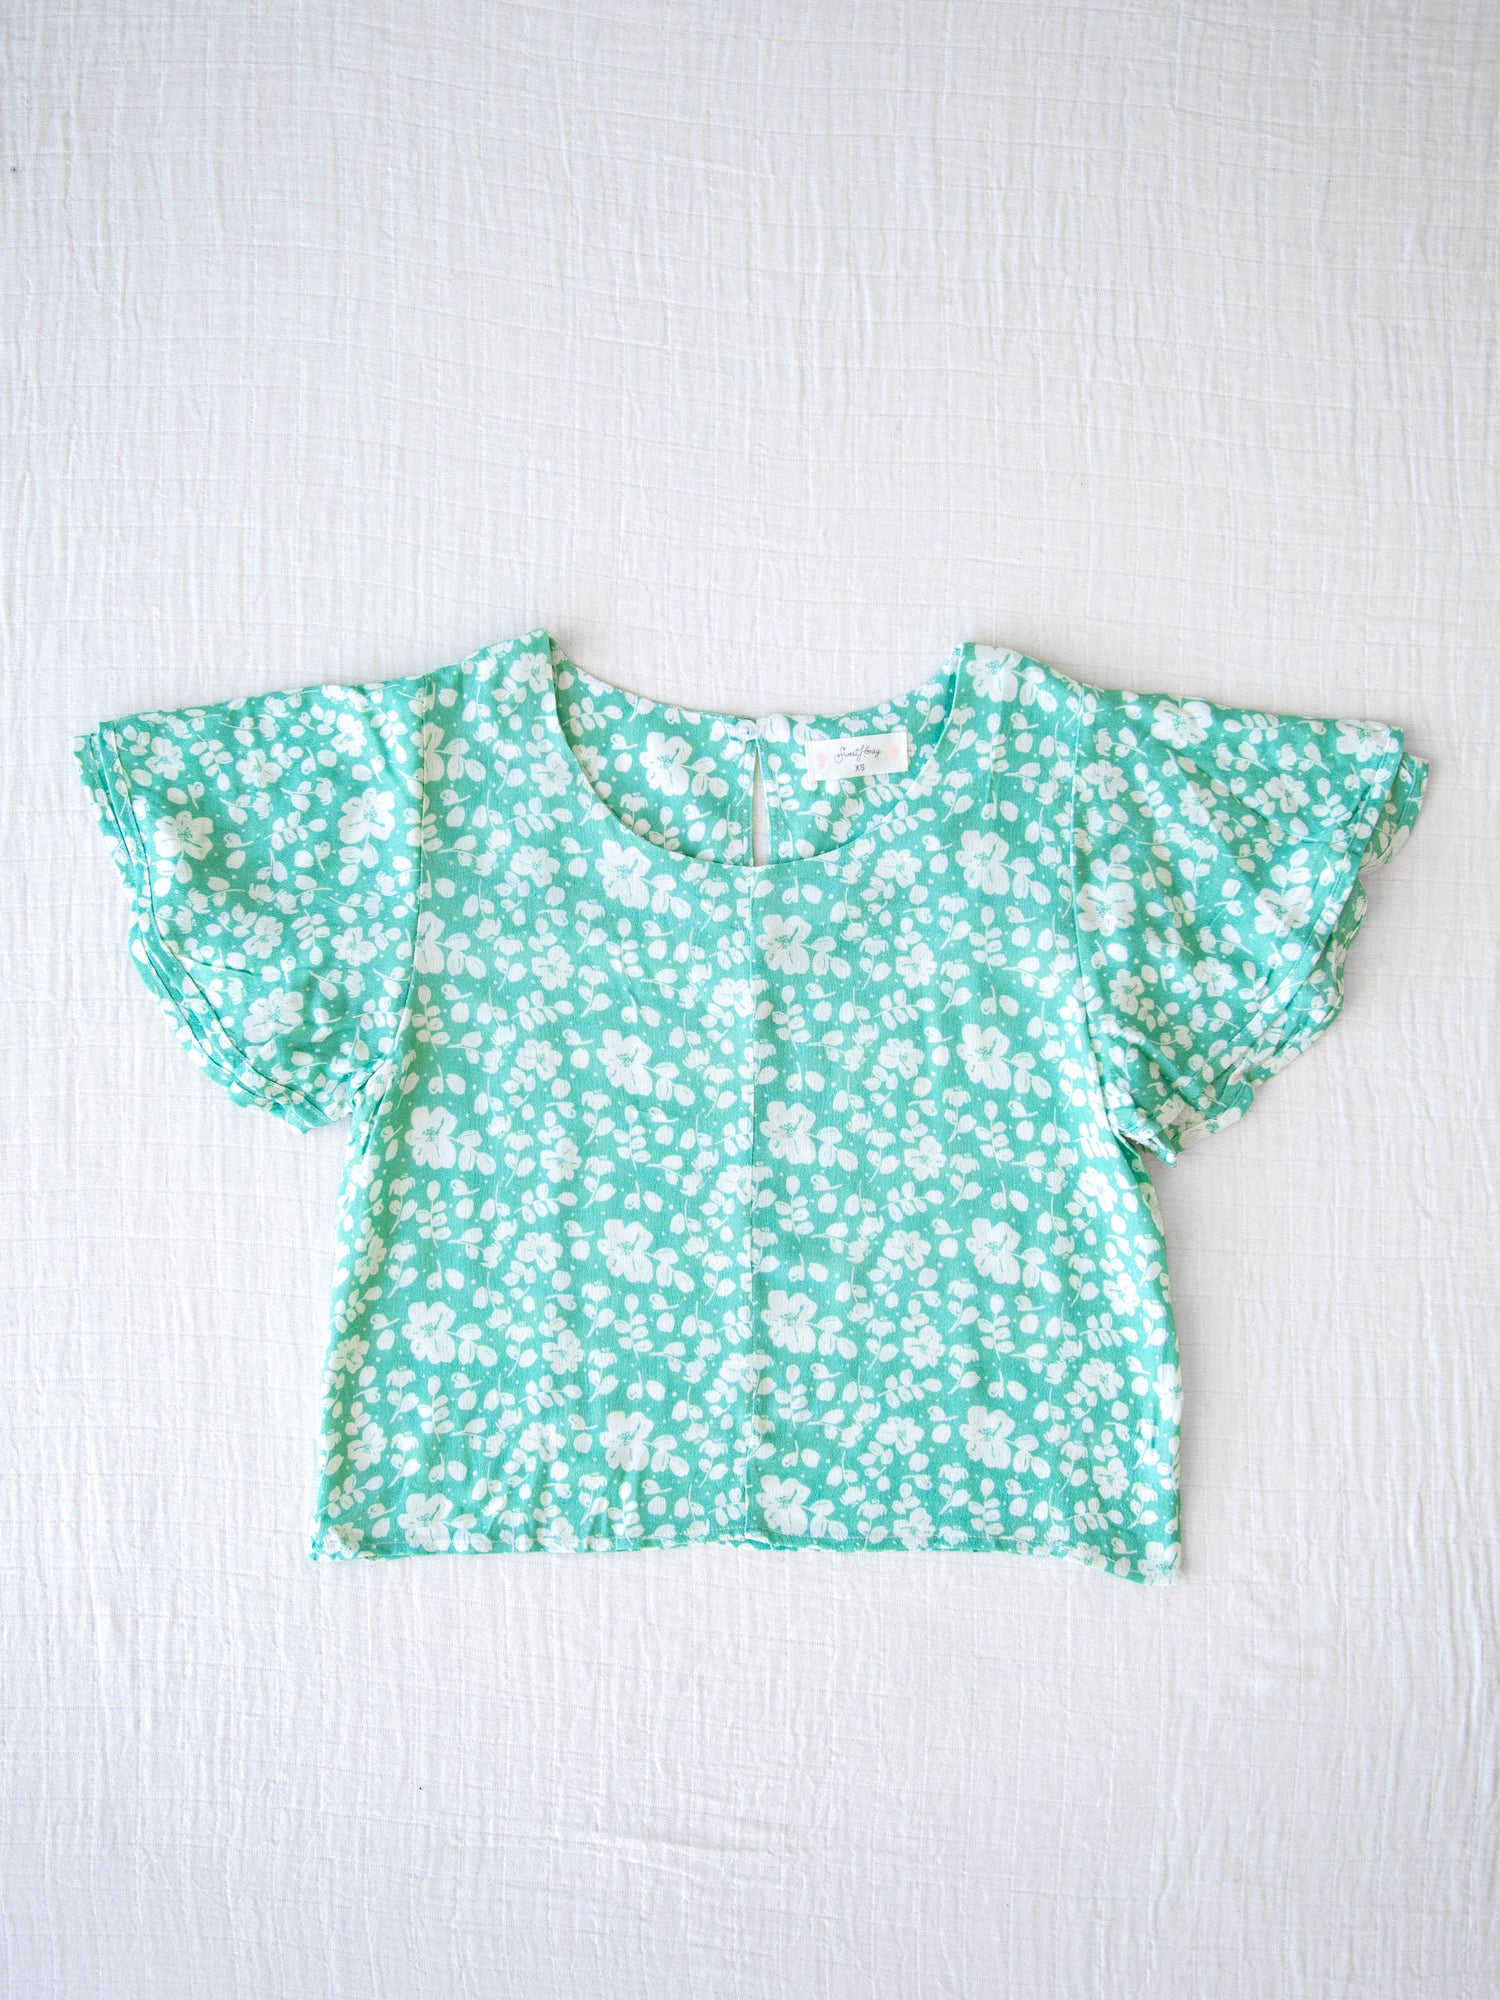 Classic Flutter Top - Green Rush. This top has a keyhole back and flowy double ruffle sleeves. It is a pattern of white flowers and leaves on a vibrant green background.